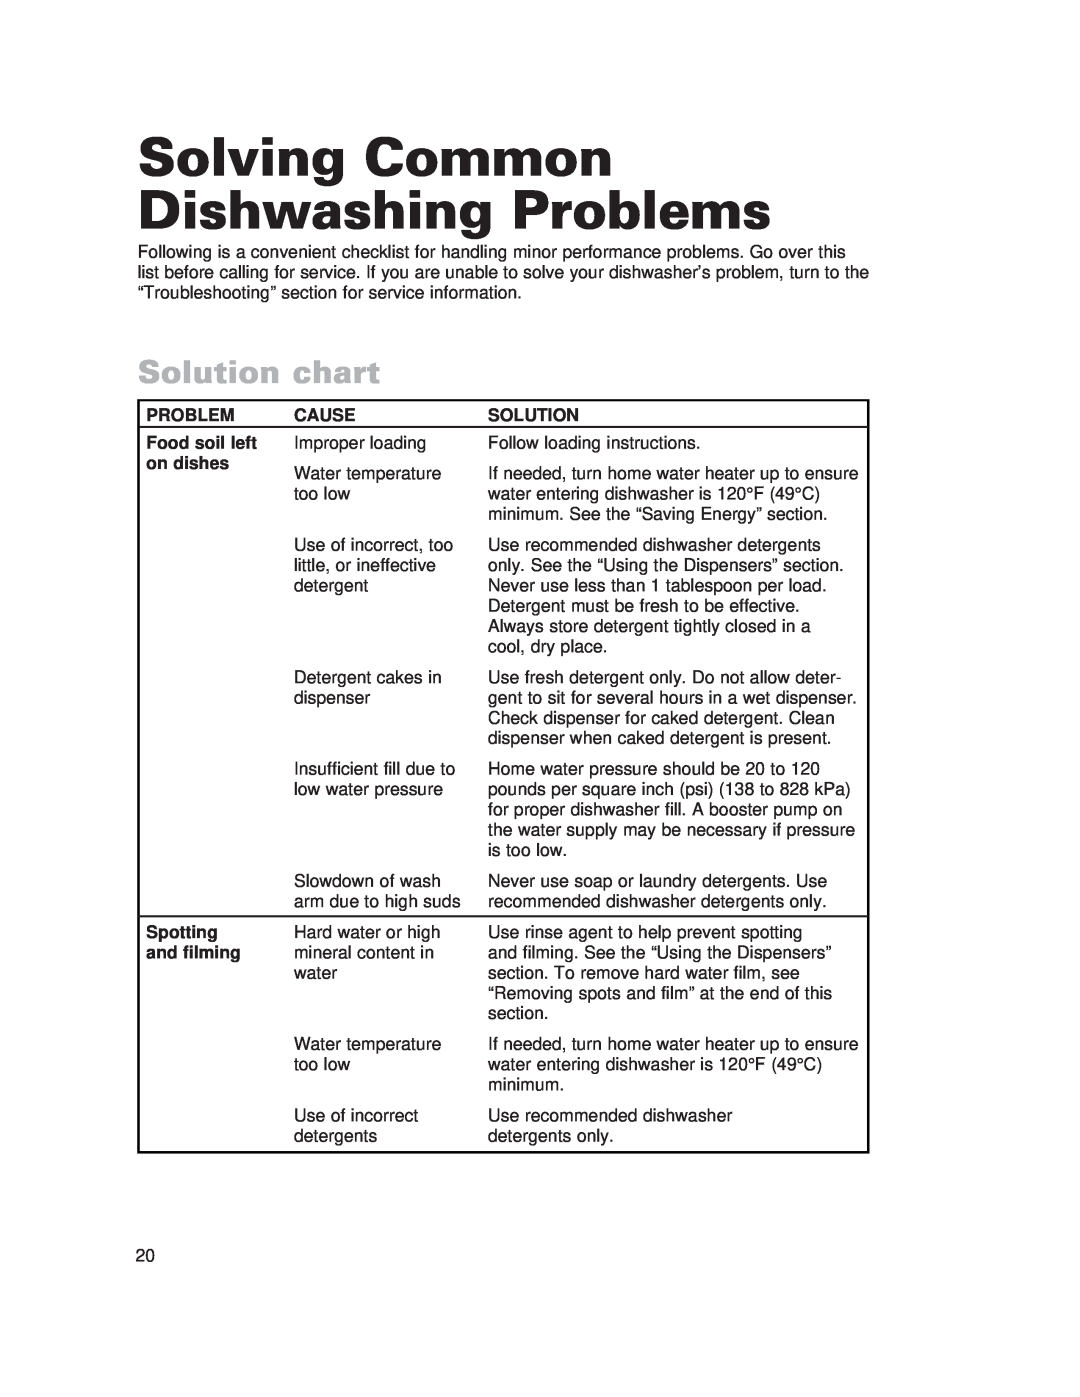 Whirlpool 910 Series warranty Solving Common Dishwashing Problems, Solution chart 